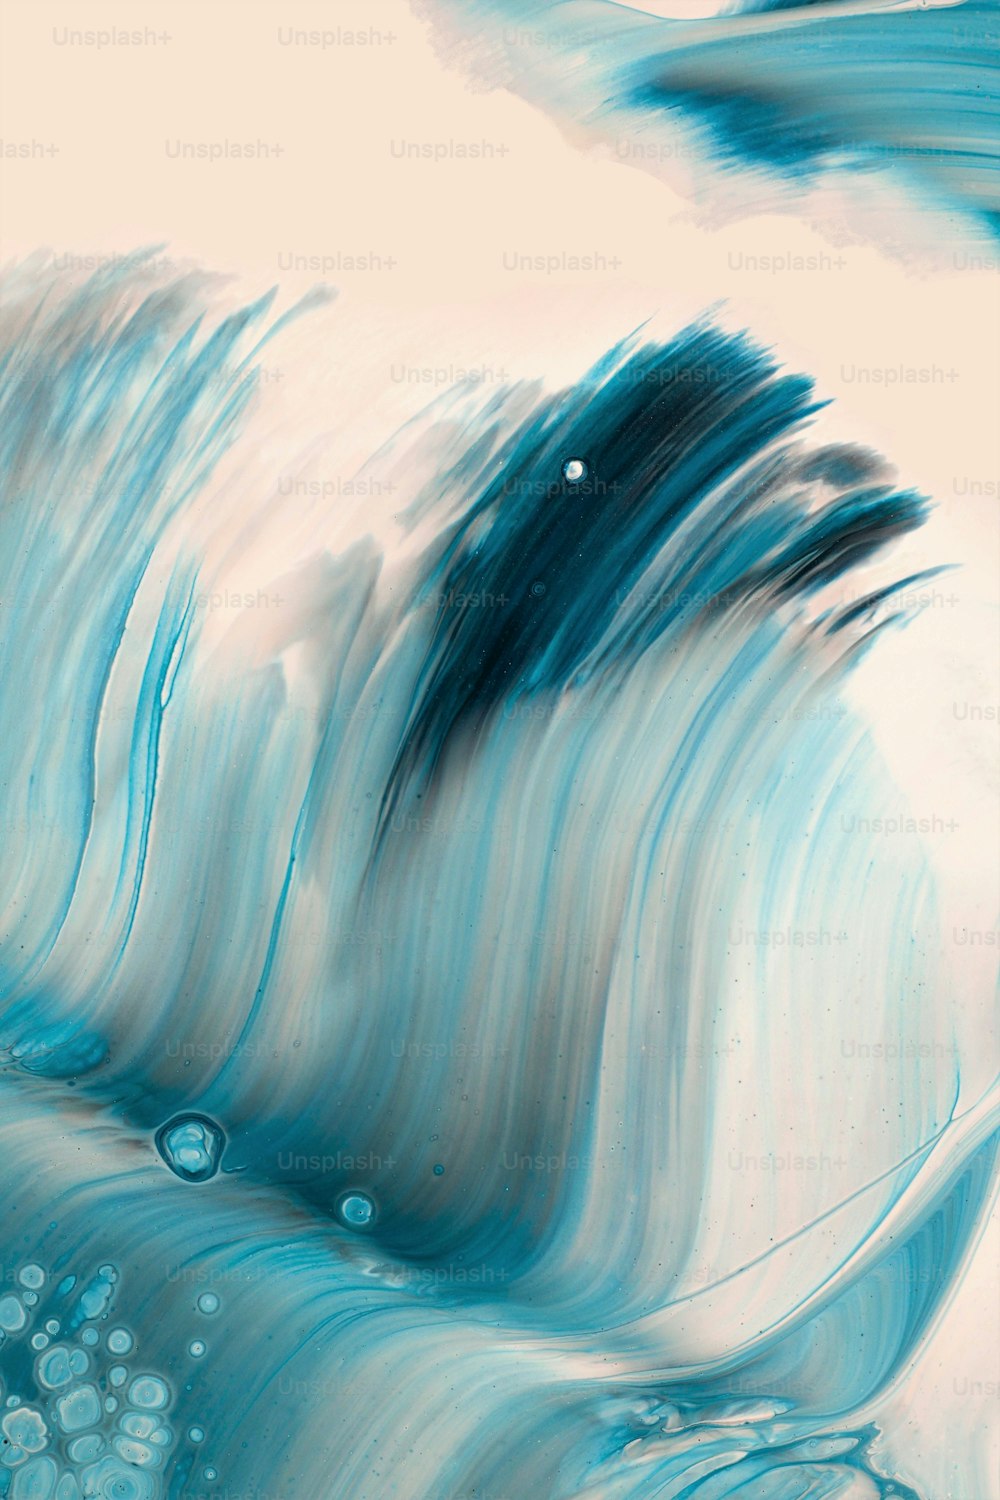 a painting of a wave in blue and white